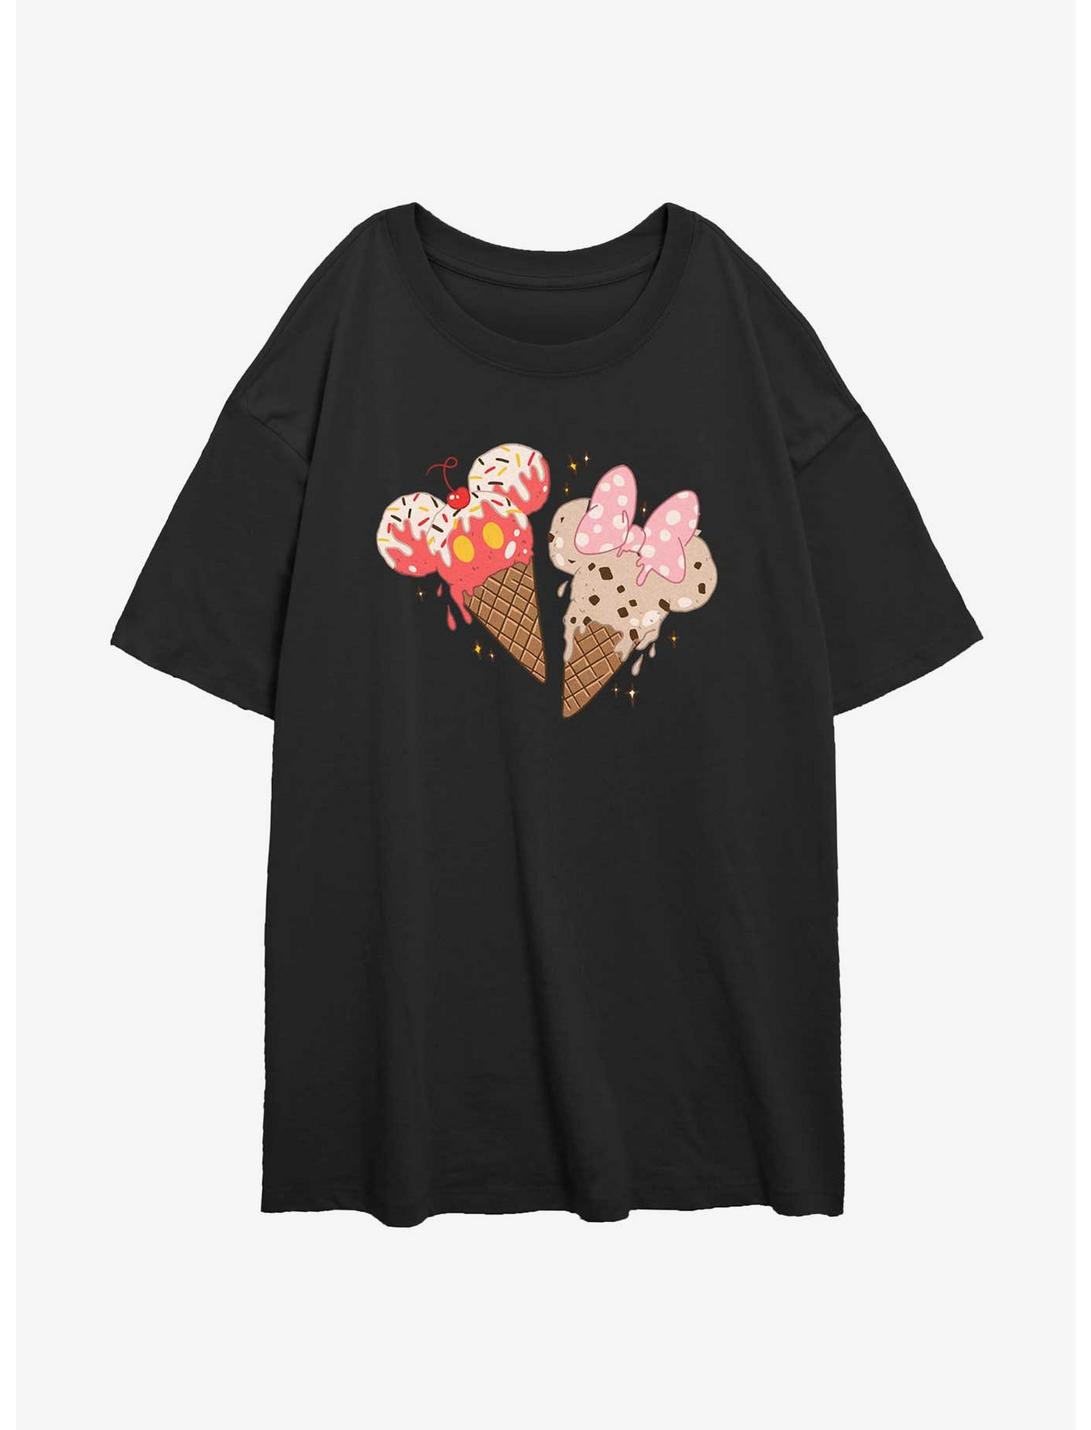 Disney Mickey Mouse & Minnie Mouse Ice Cream Cones Girls Oversized T-Shirt, BLACK, hi-res